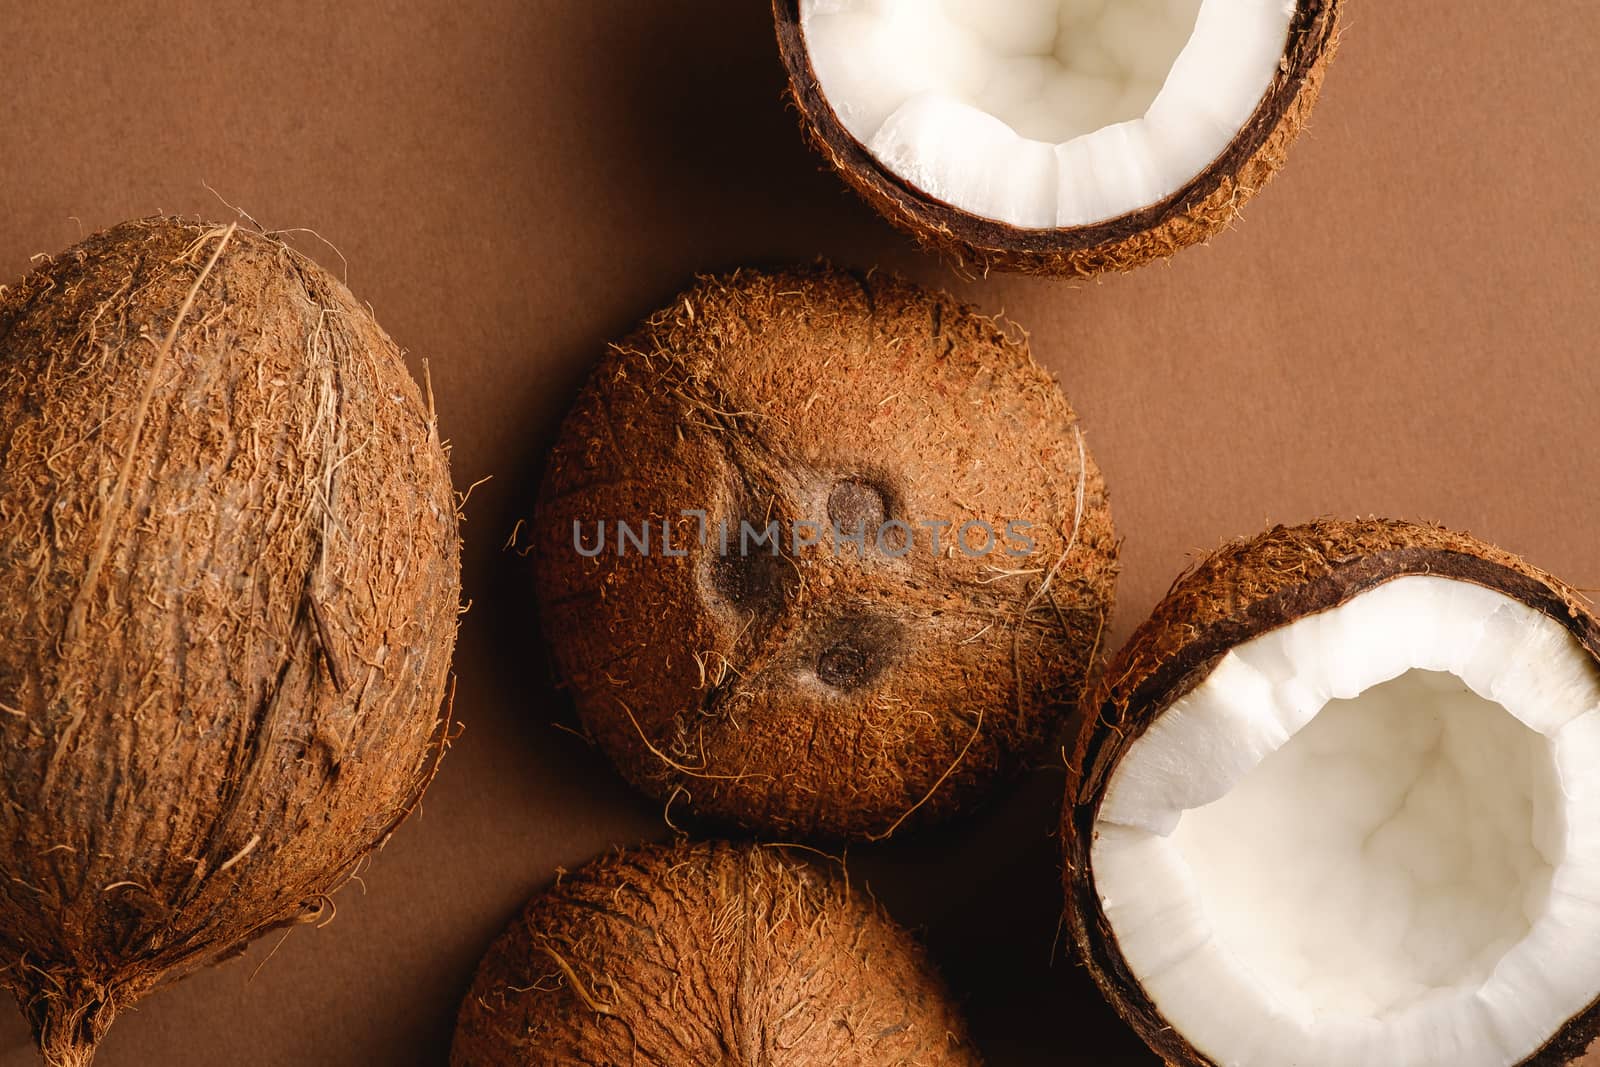 Coconut fruits on brown plain background, abstract food tropical by Frostroomhead